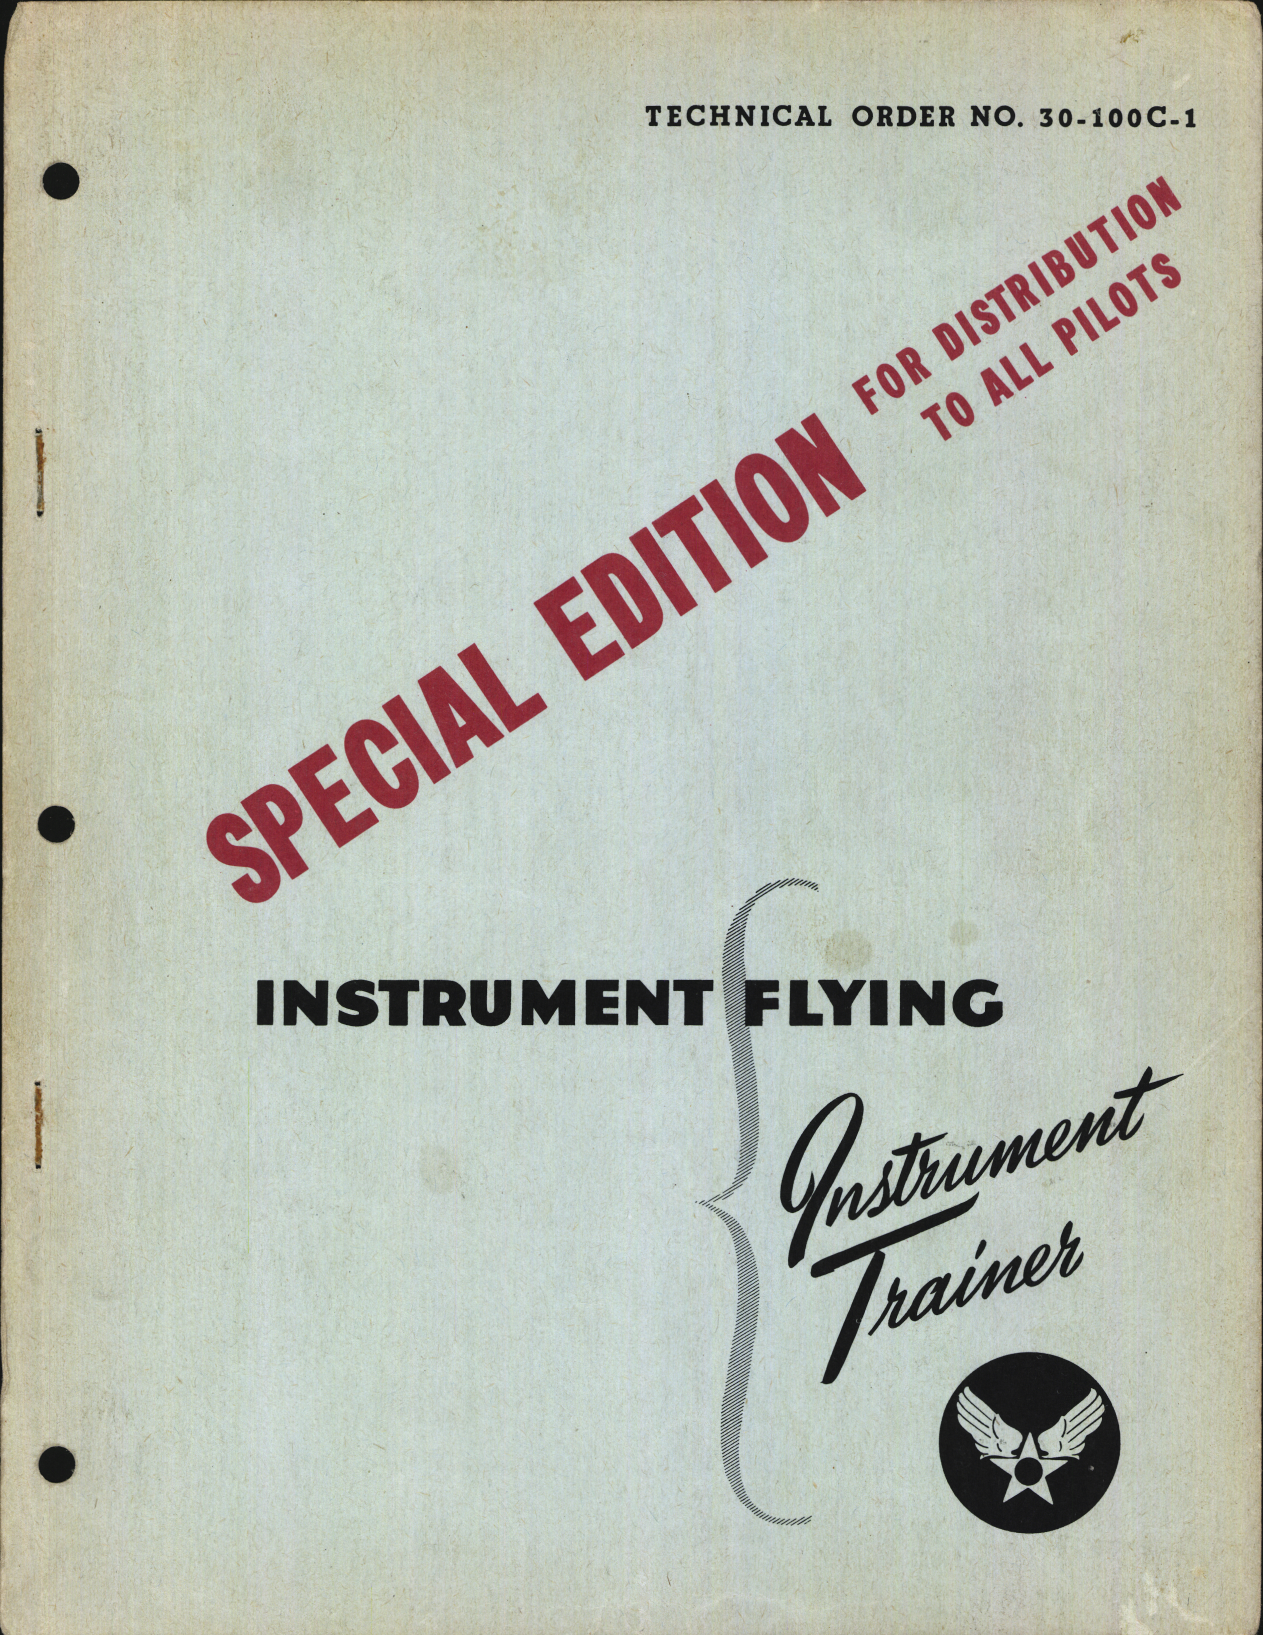 Sample page 1 from AirCorps Library document: Instrument Flying, Instrument Trainer